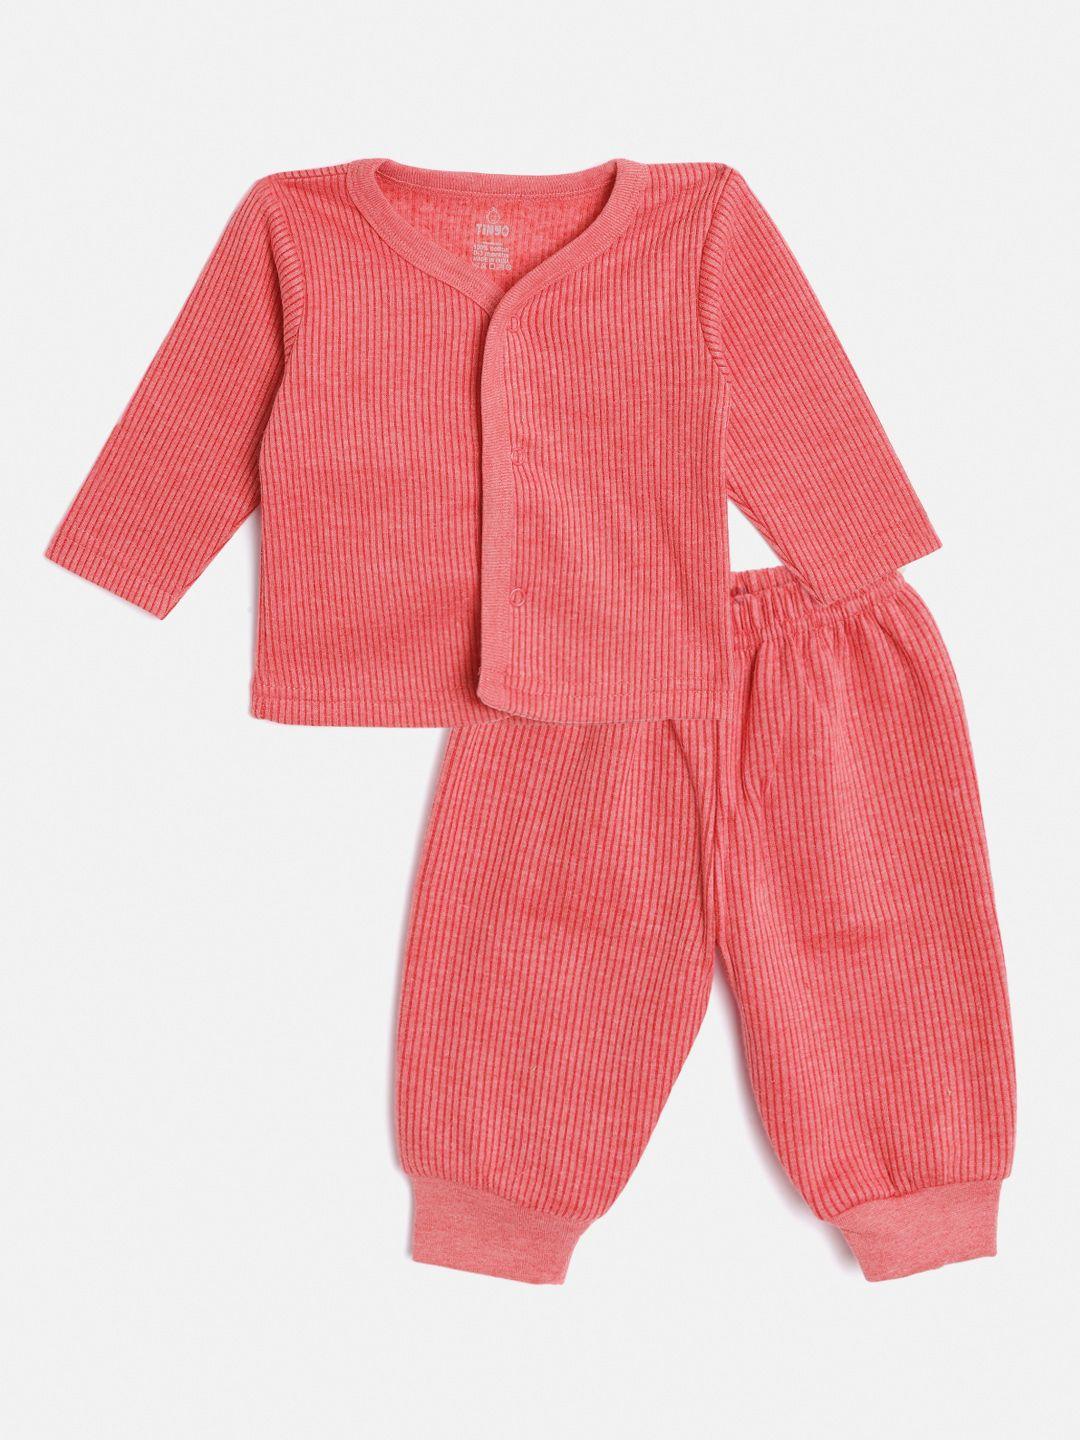 tinyo-infant-kids-red-pure-cotton-self-striped-thermal-set